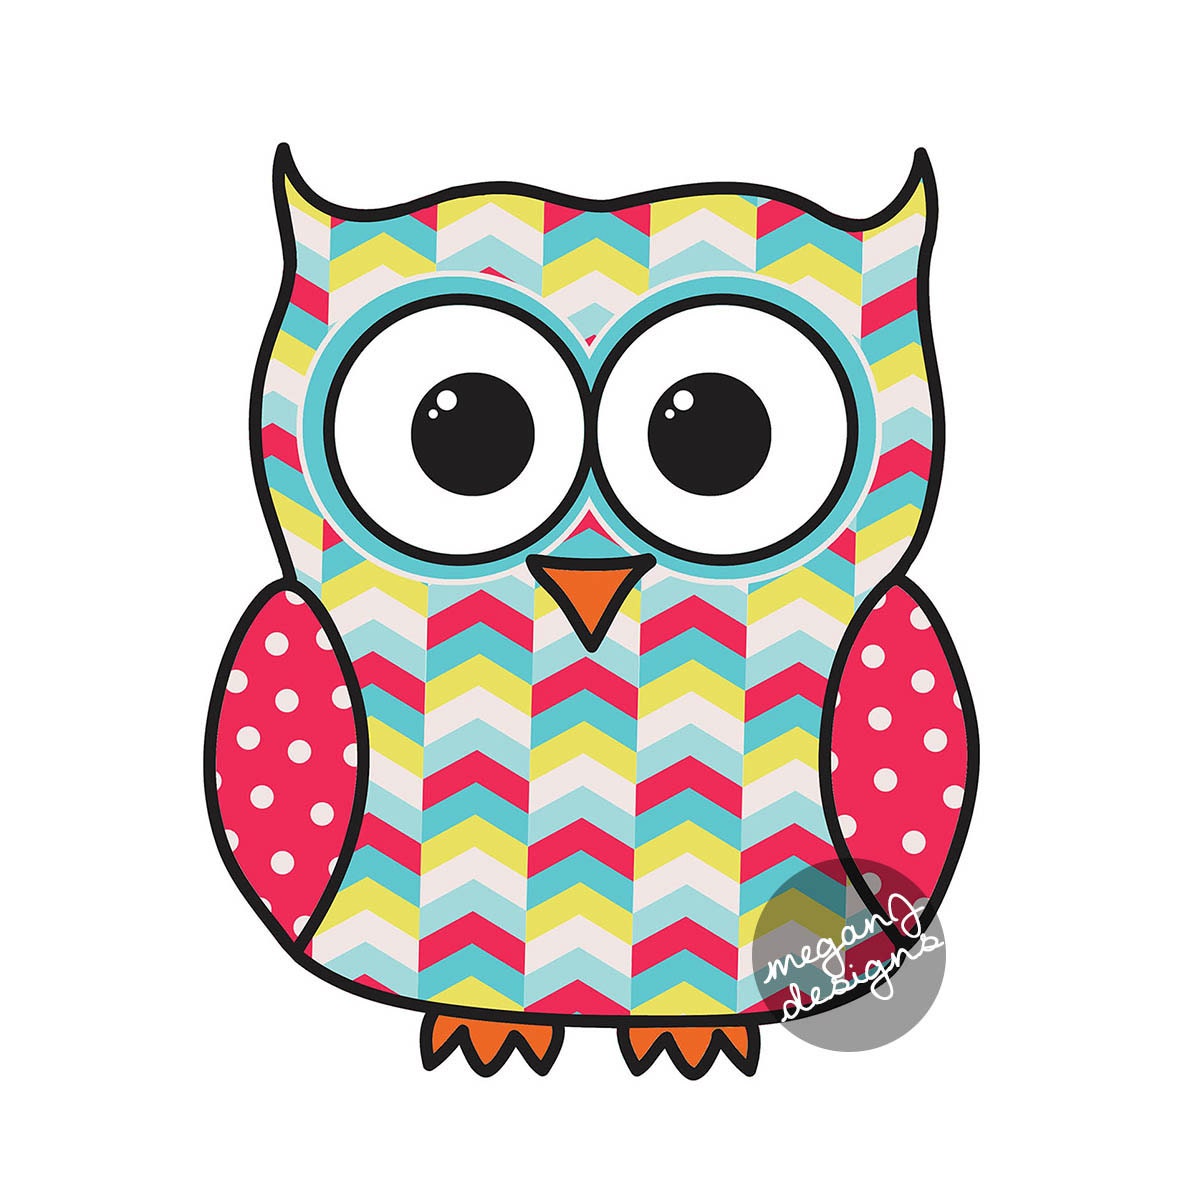 Colorful Tribal Pattern Owl Car Decal Sticker Geometric Cute Coloring Wallpapers Download Free Images Wallpaper [coloring876.blogspot.com]